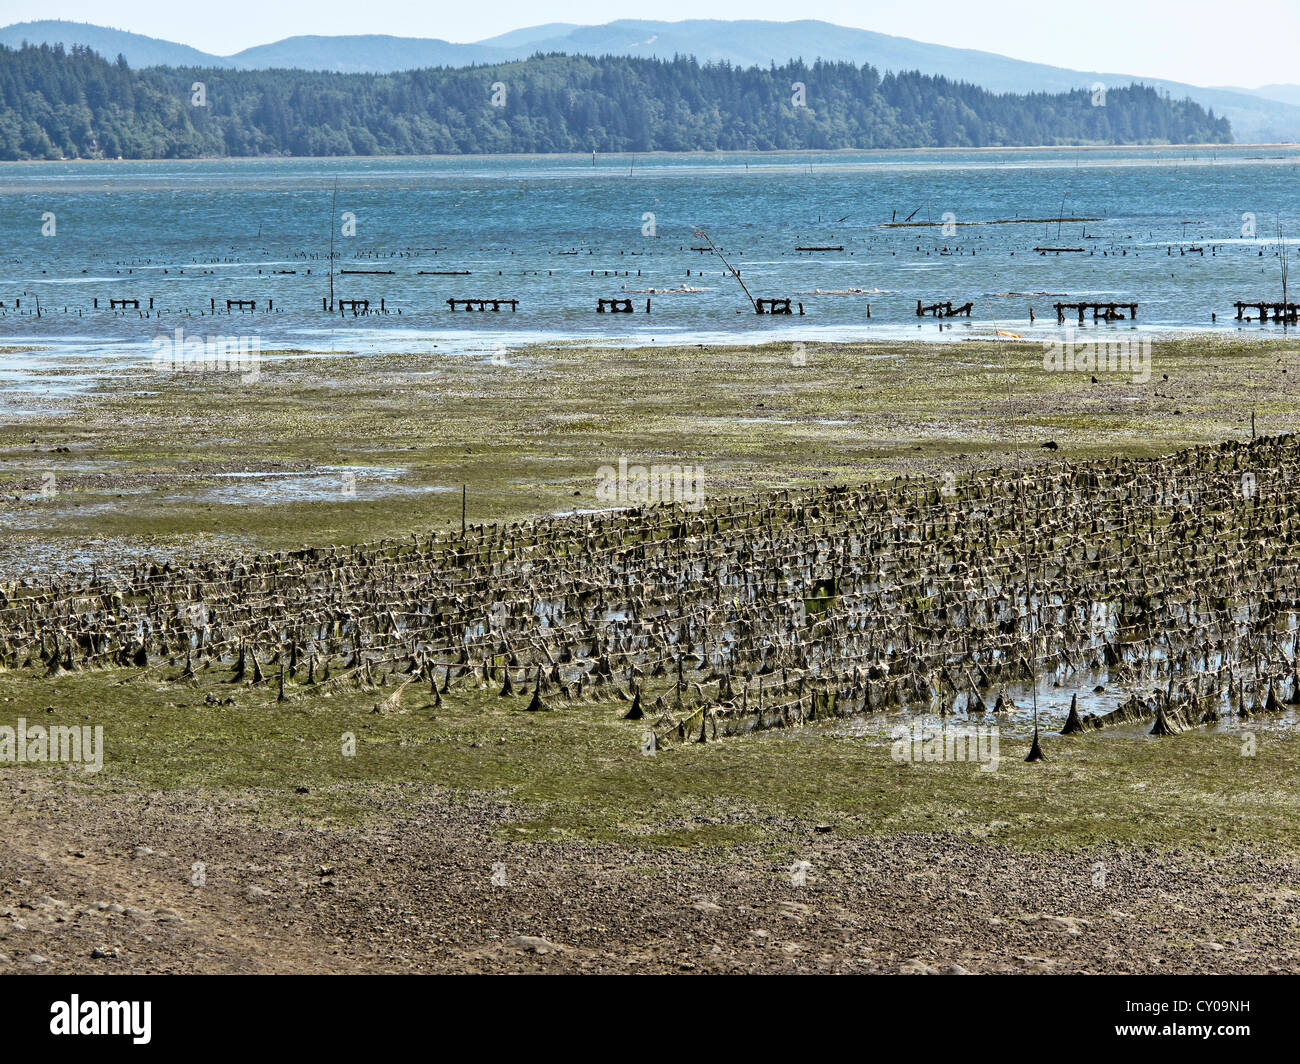 mud flats at low tide revealing oyster beds Willipa Bay Washington State Stock Photo